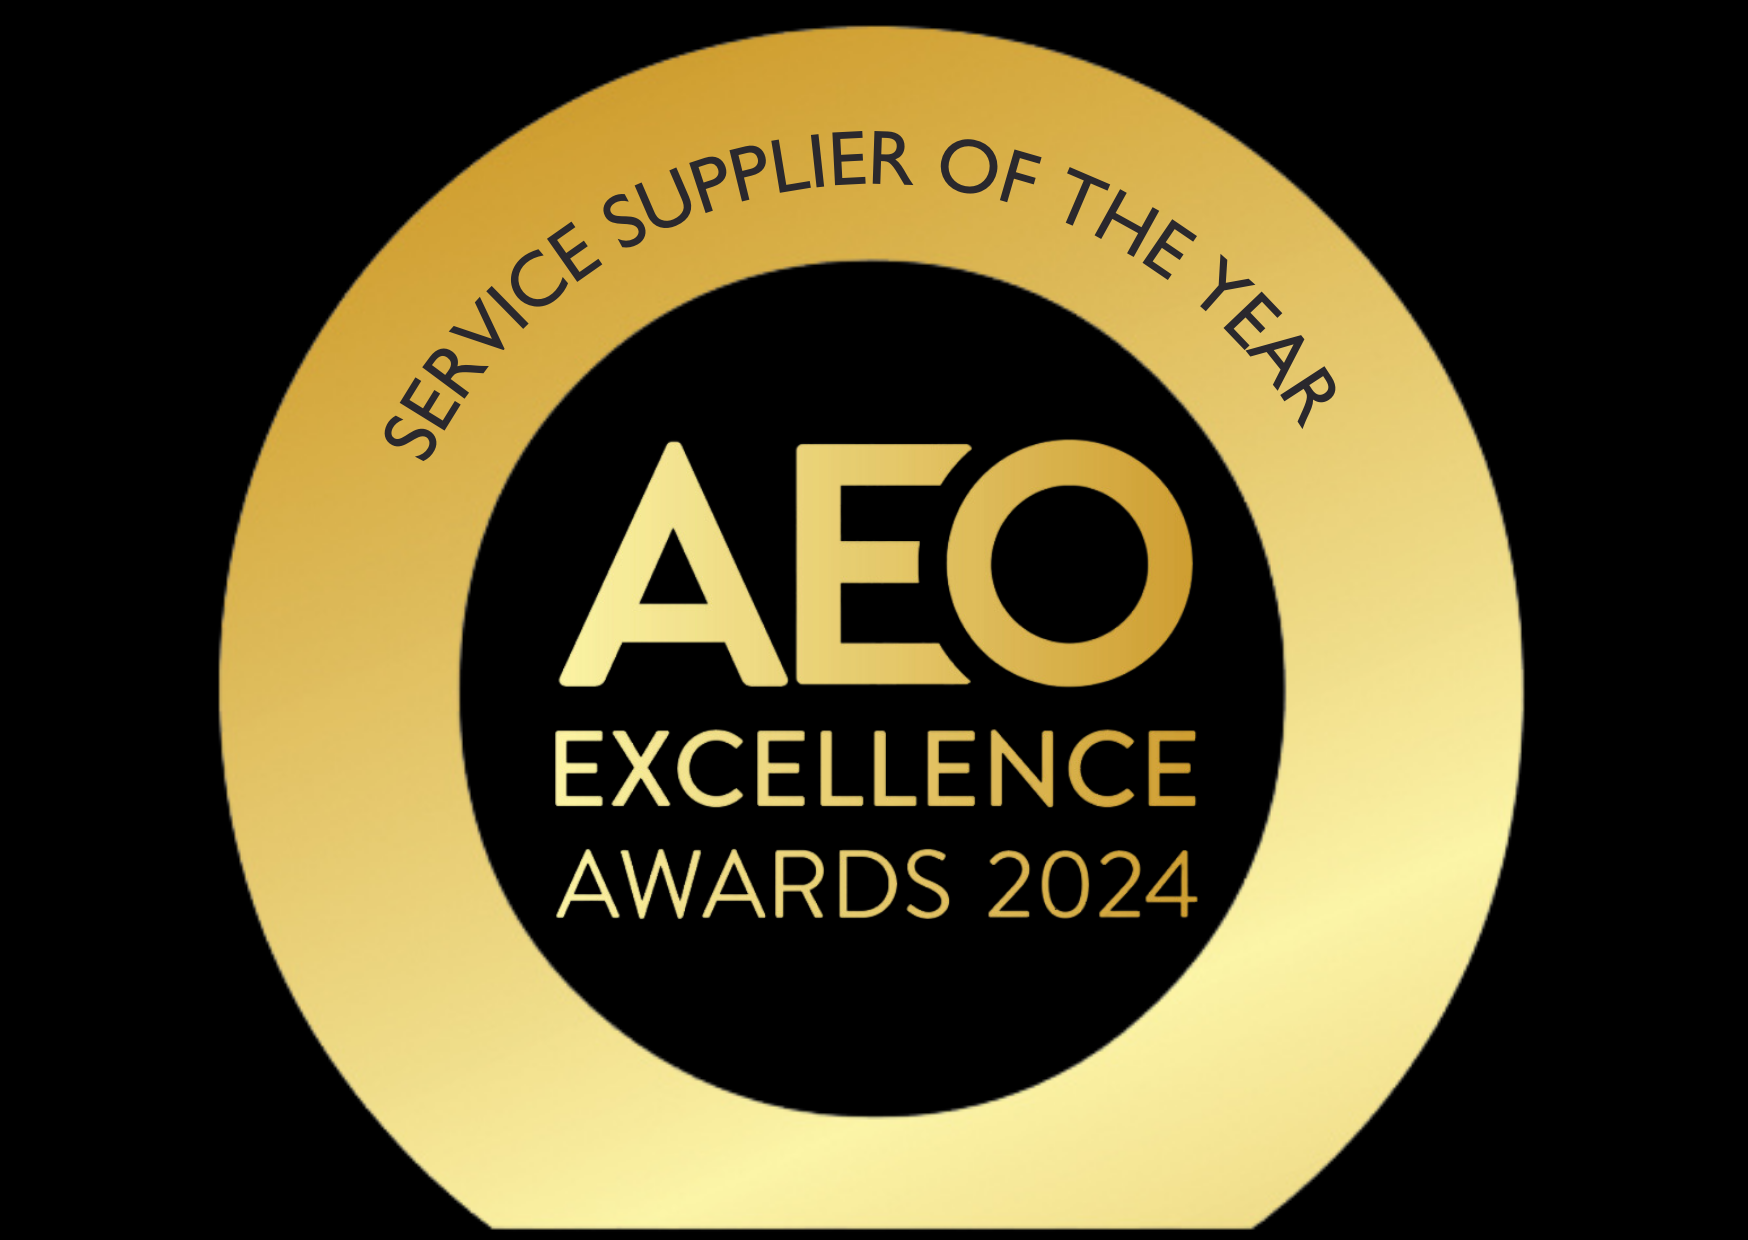 SERVICE SUPPLIER OF THE YEAR